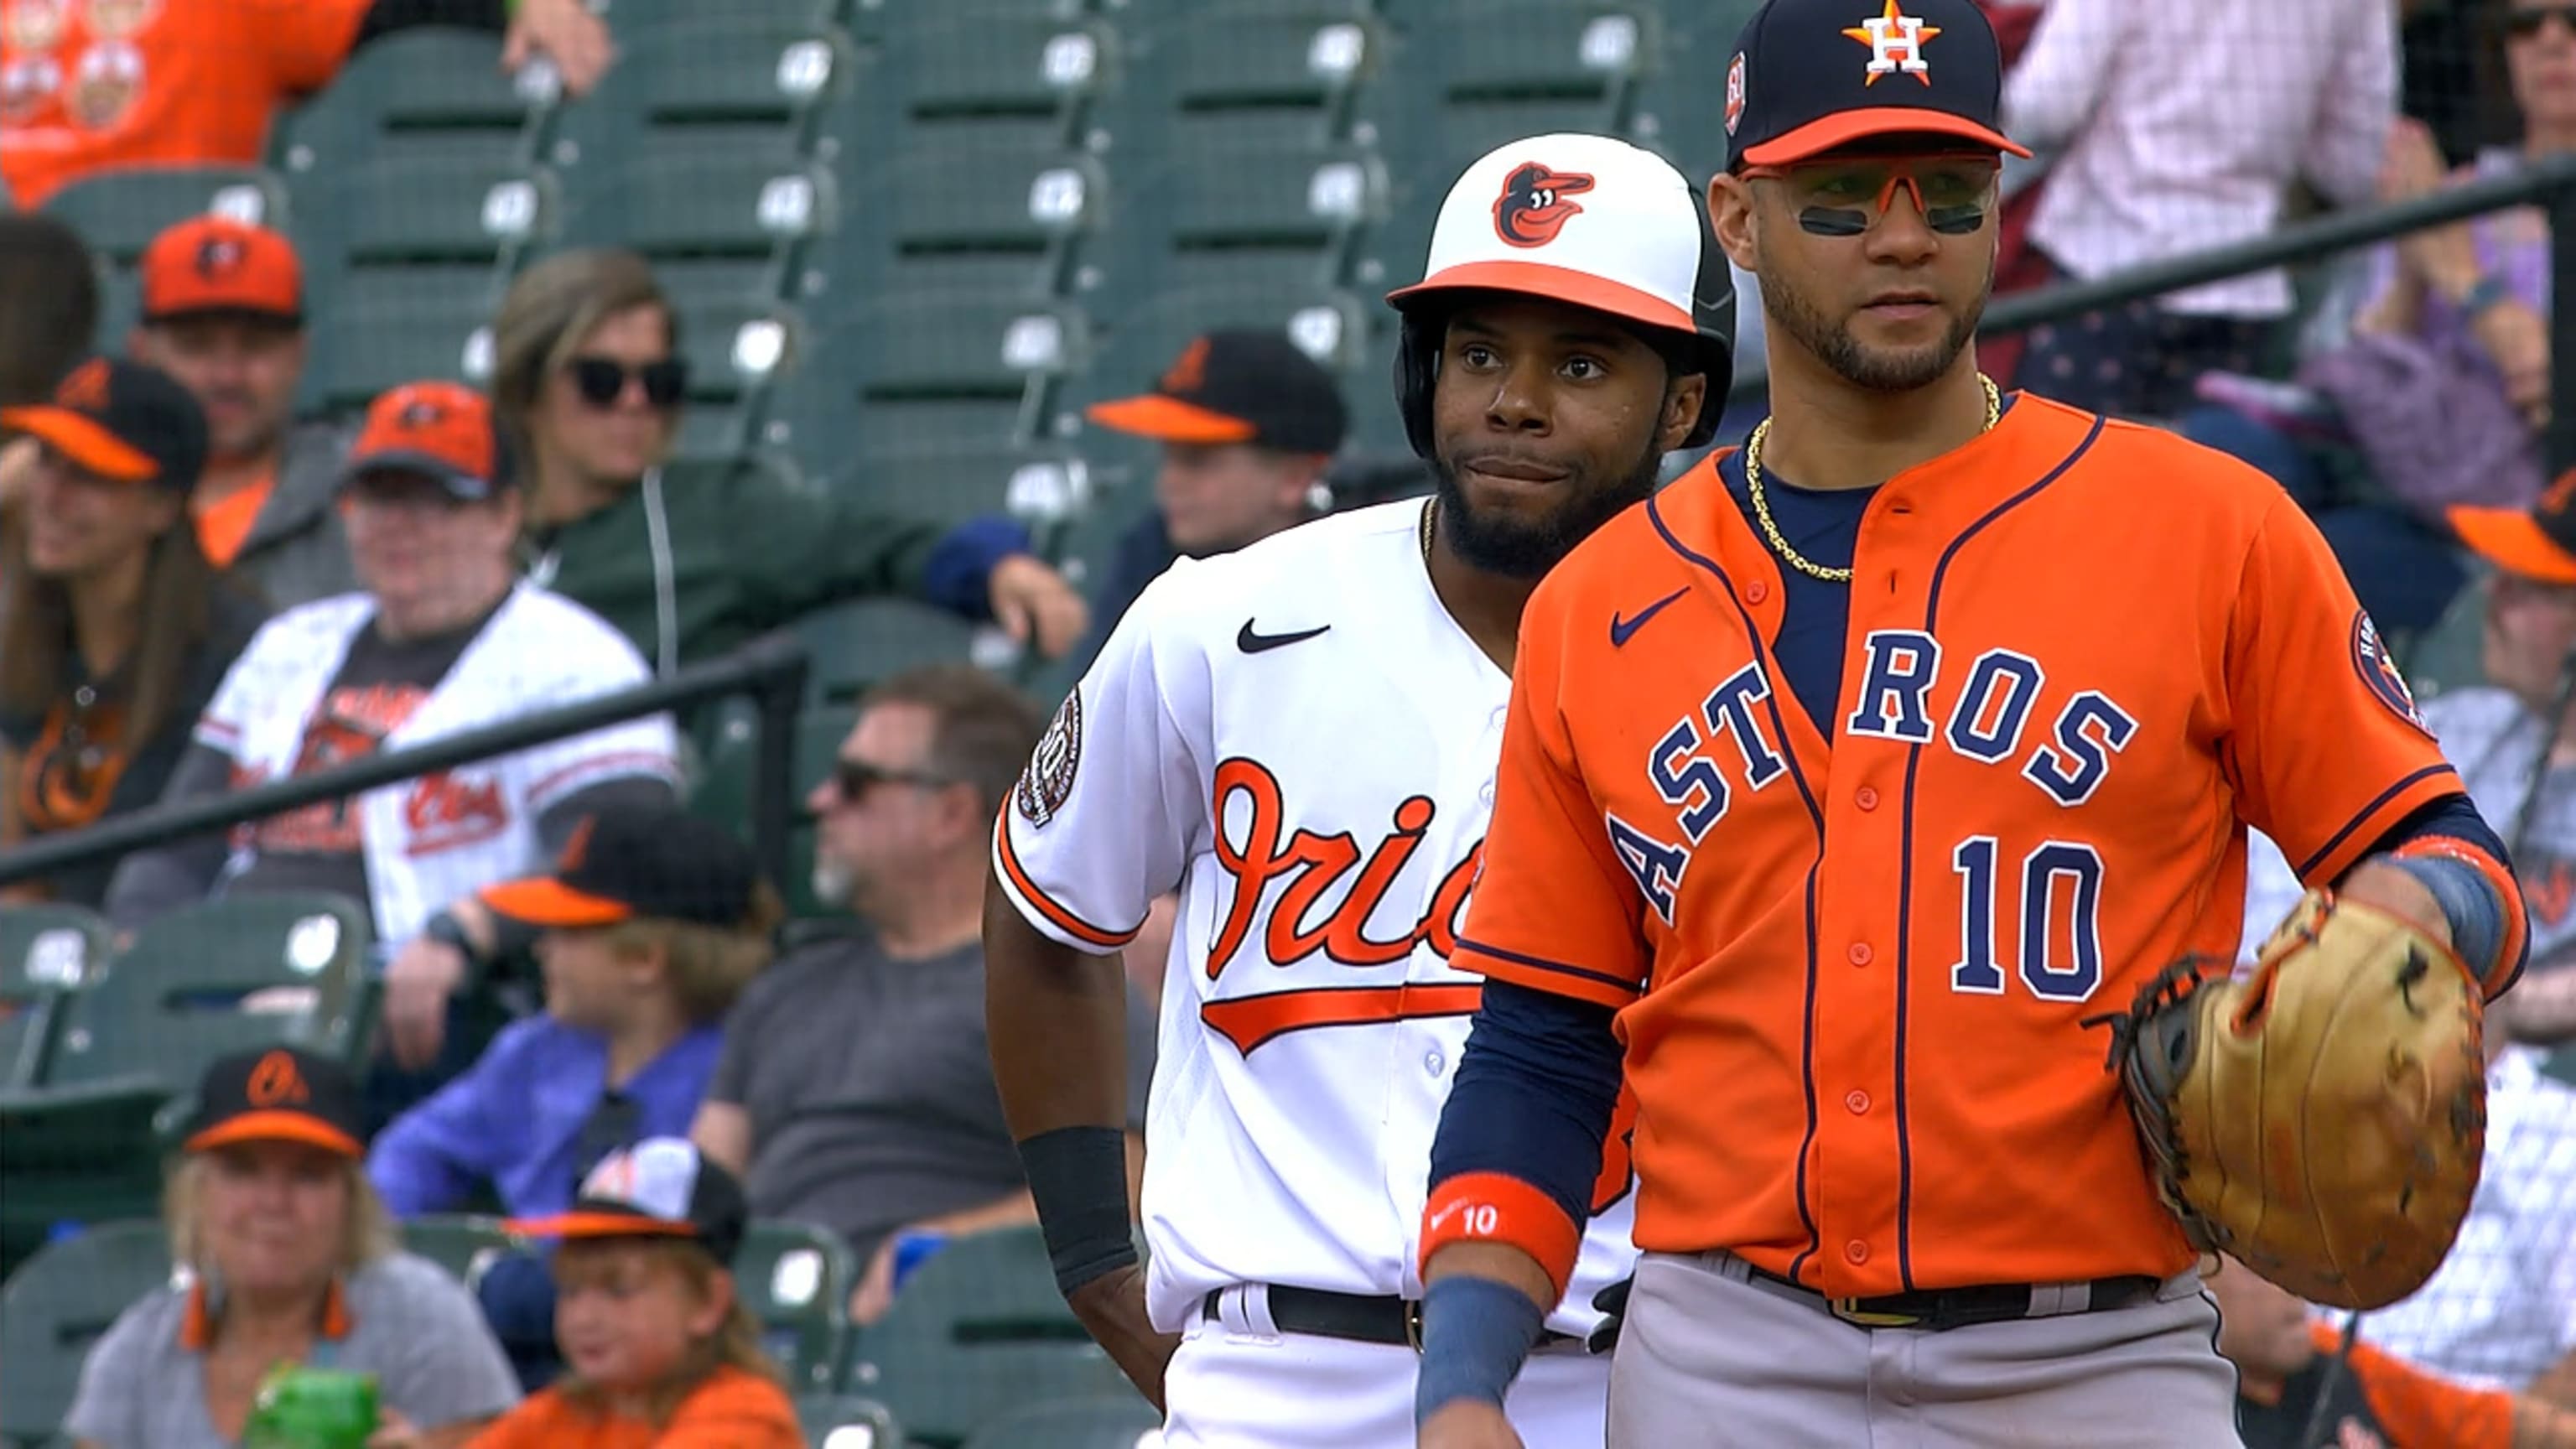 Astros, Orioles to Wear Throwbacks for Civil Rights Game